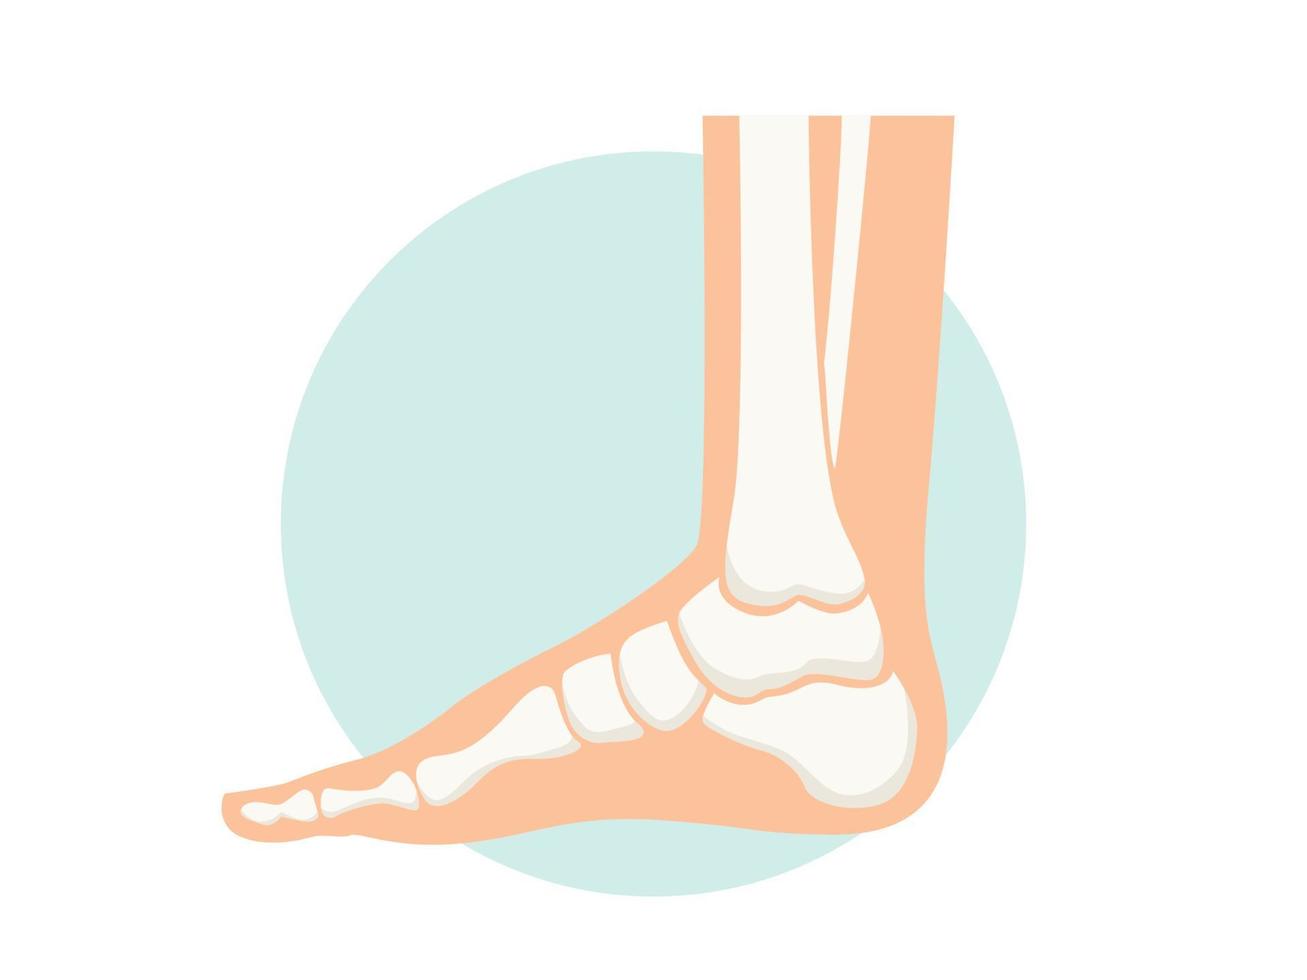 Foot with x-ray bones illustration vector